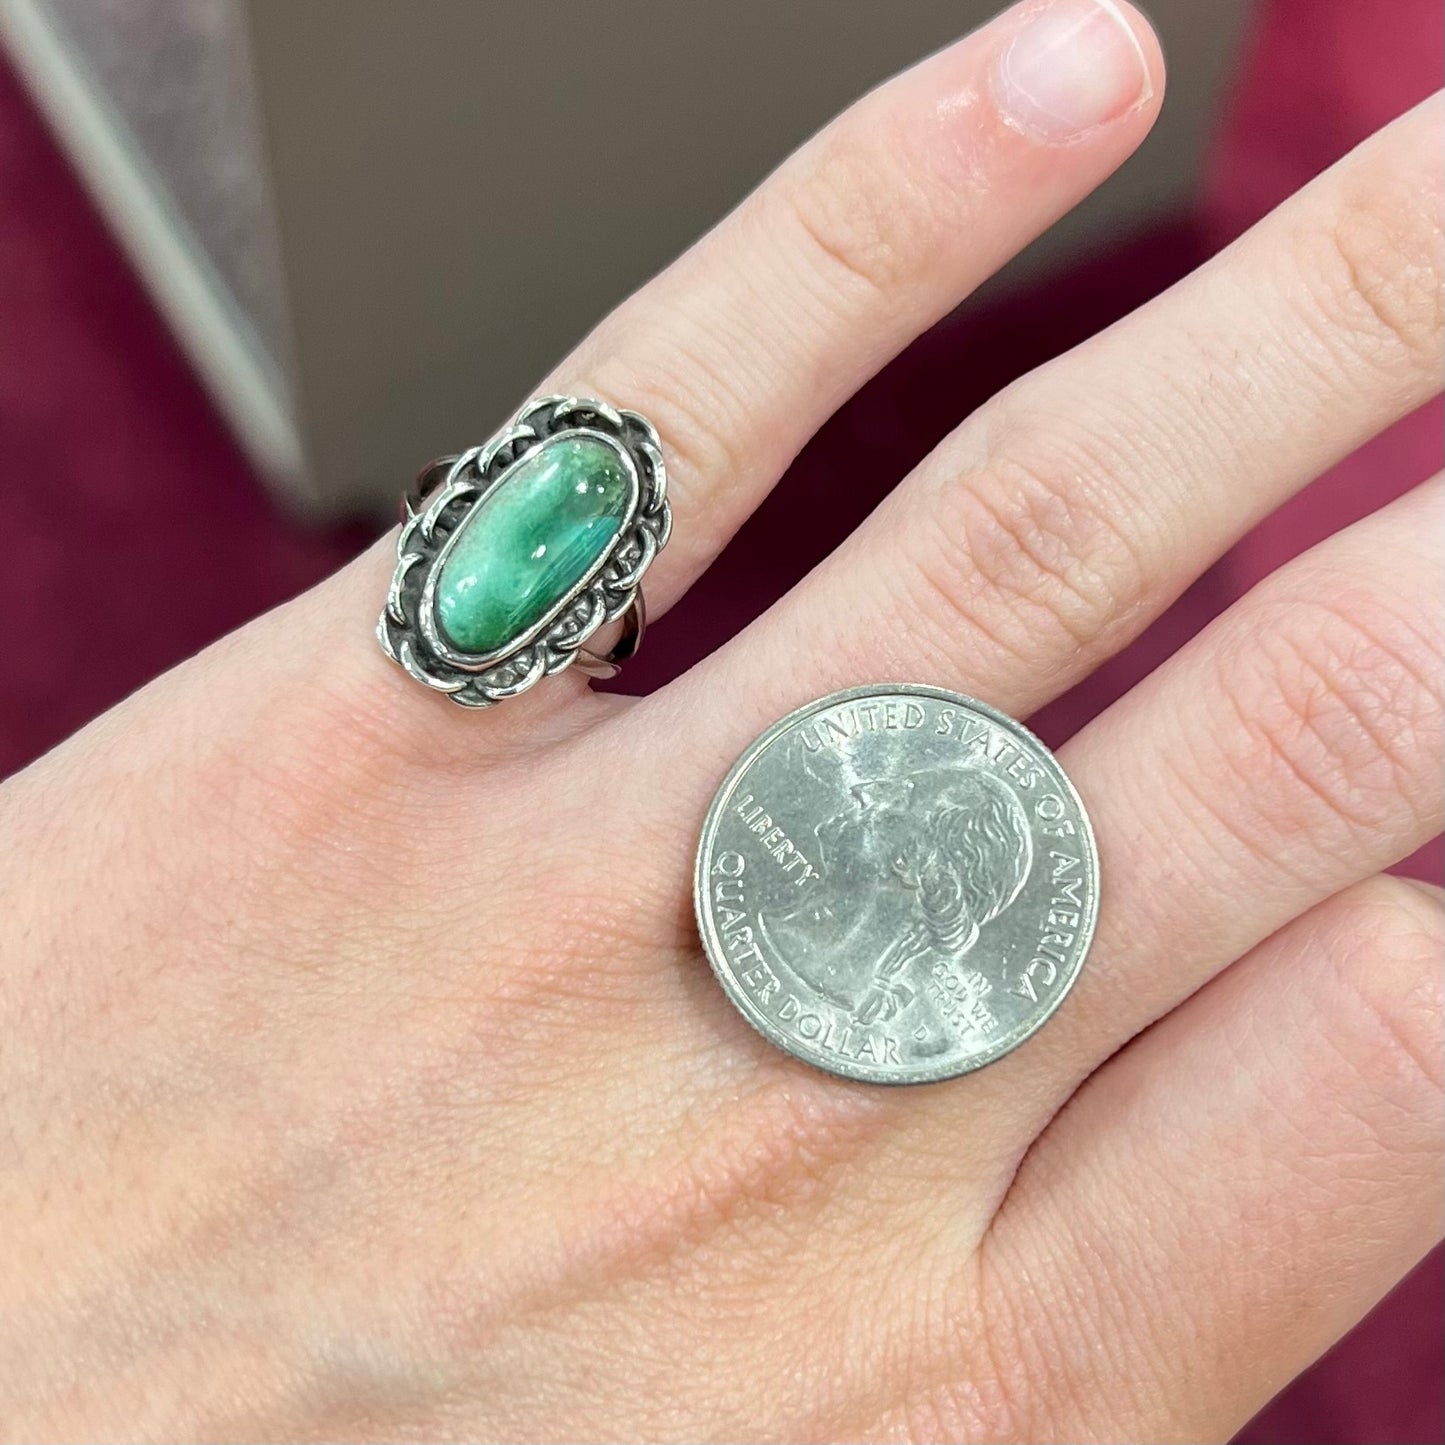 A handmade, split shank, sterling silver ring bezel set with a green variscite stone from Utah, USA.